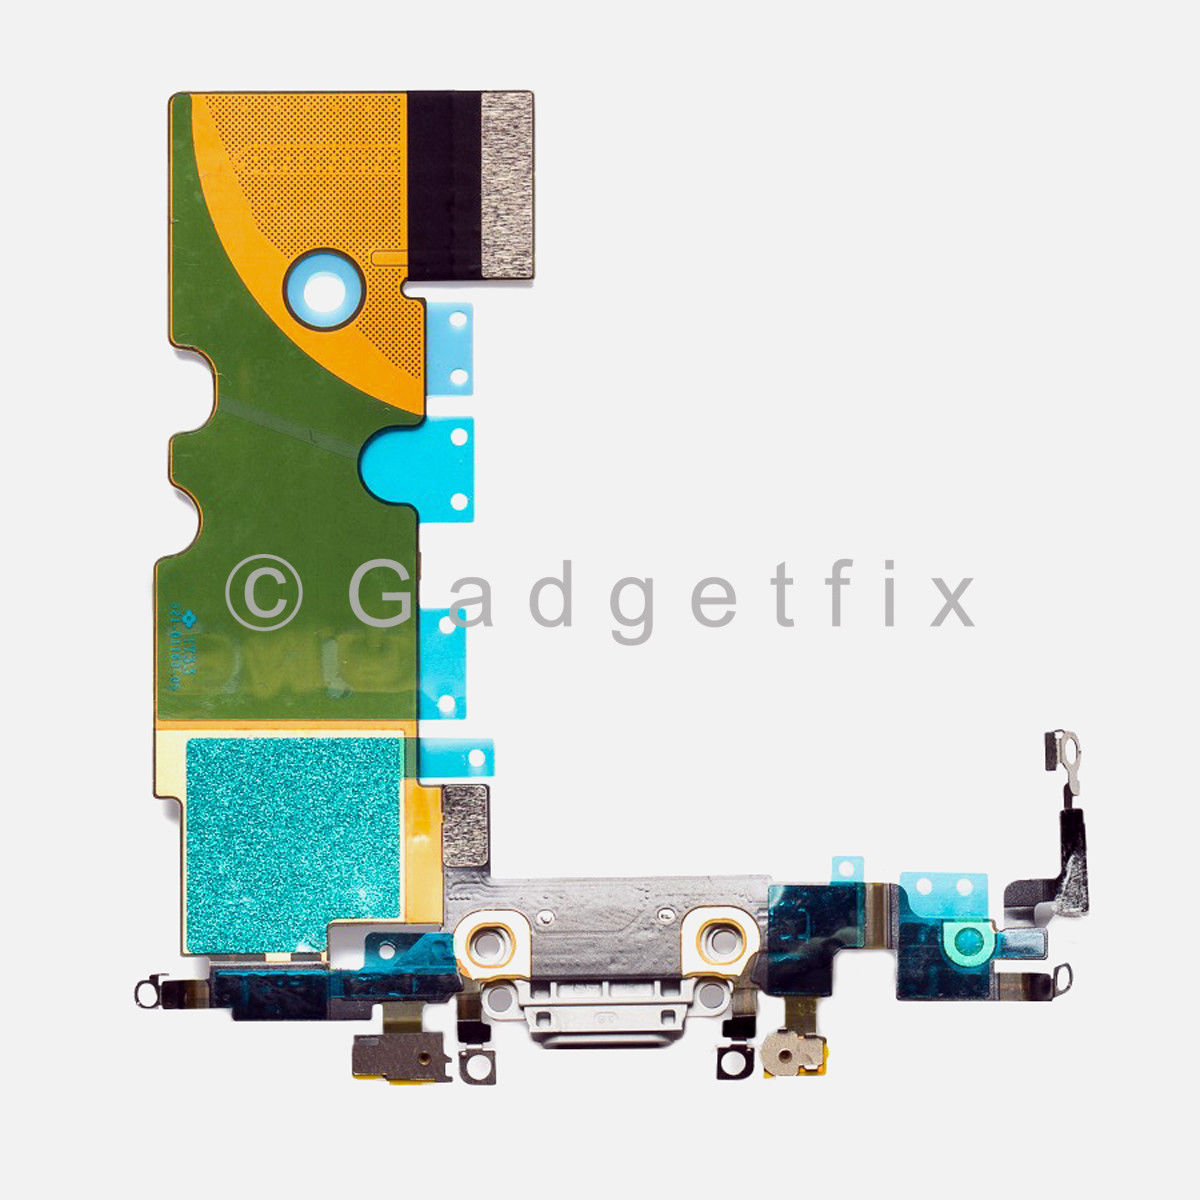 Gray Lightning Charger Charging Port Dock Flex Cable Replacement For iPhone 8 | SE 2020